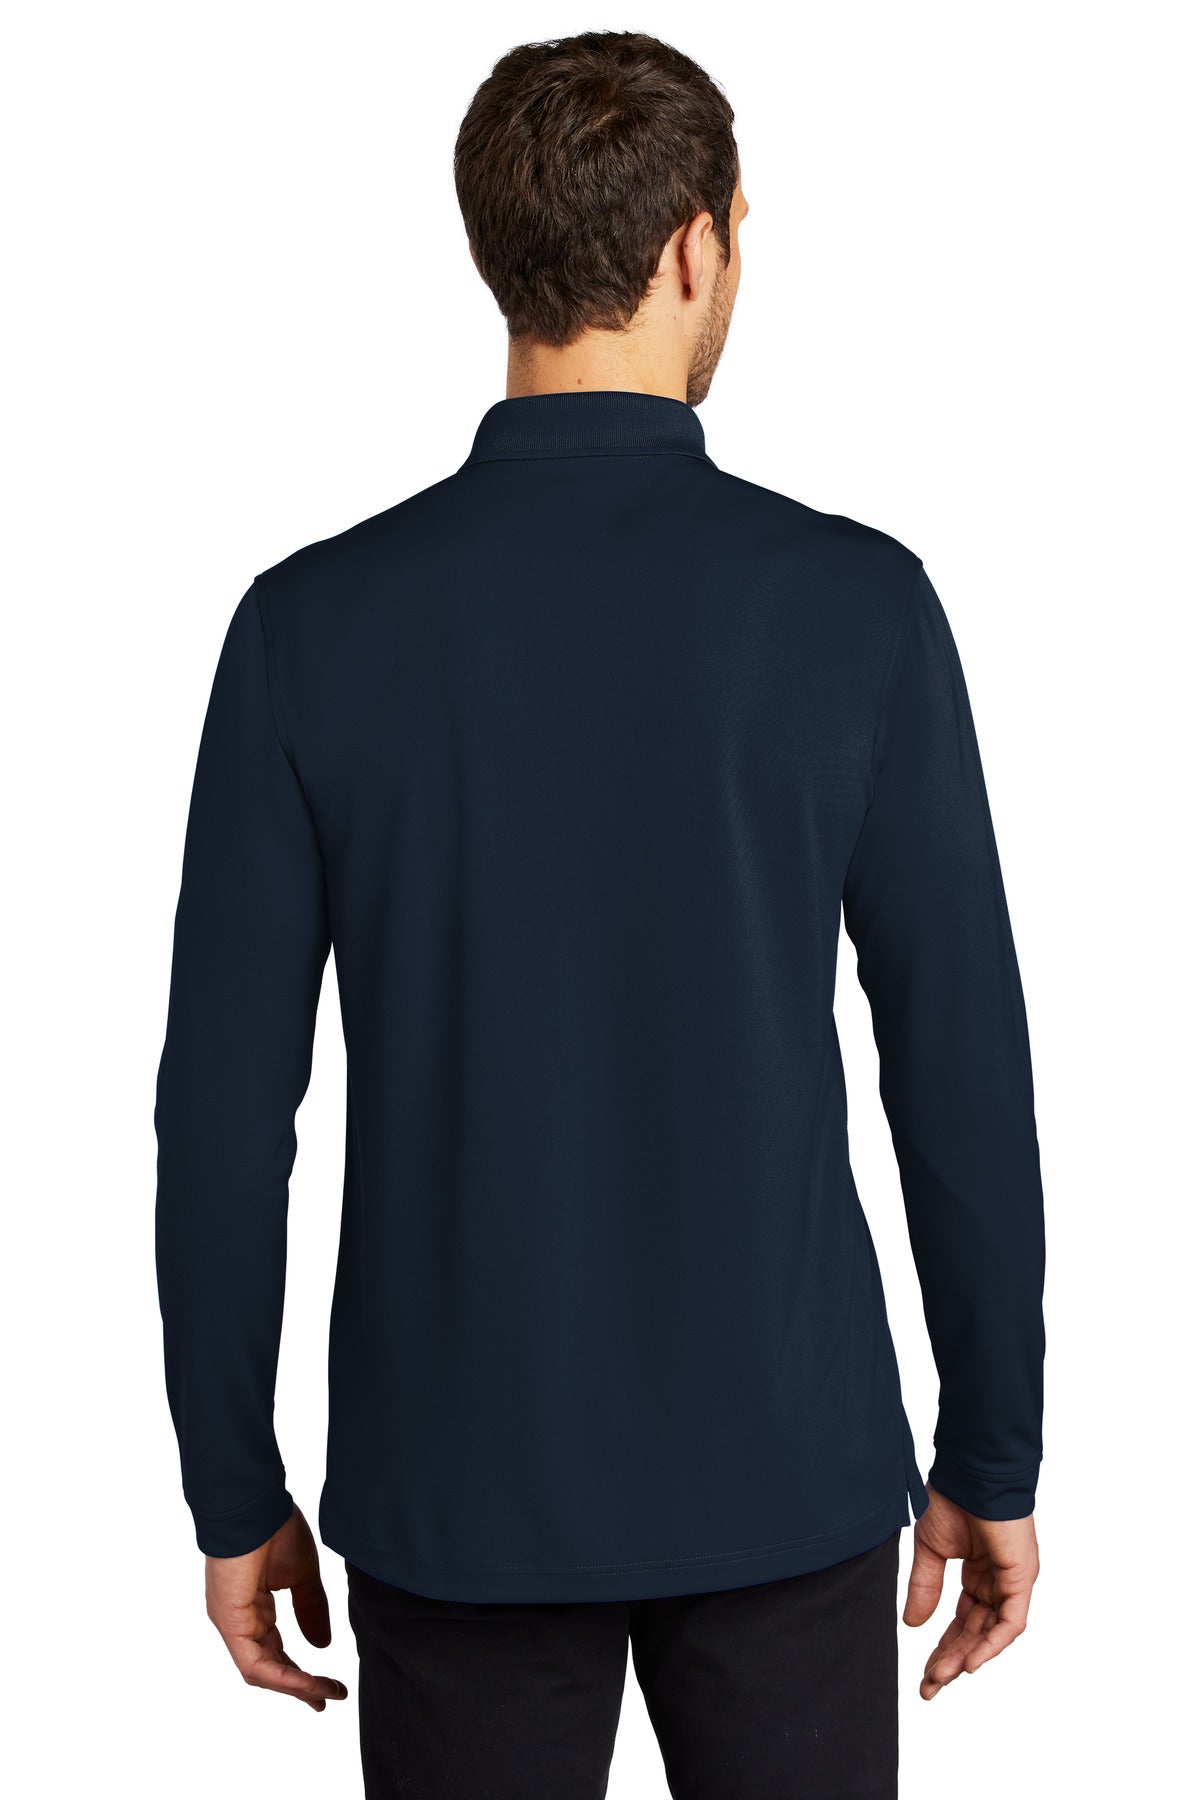 Swaasi Core - Port Authority® LONG-SLEEVE Dry Zone® UV Micro-Mesh Polo with EMB Logo